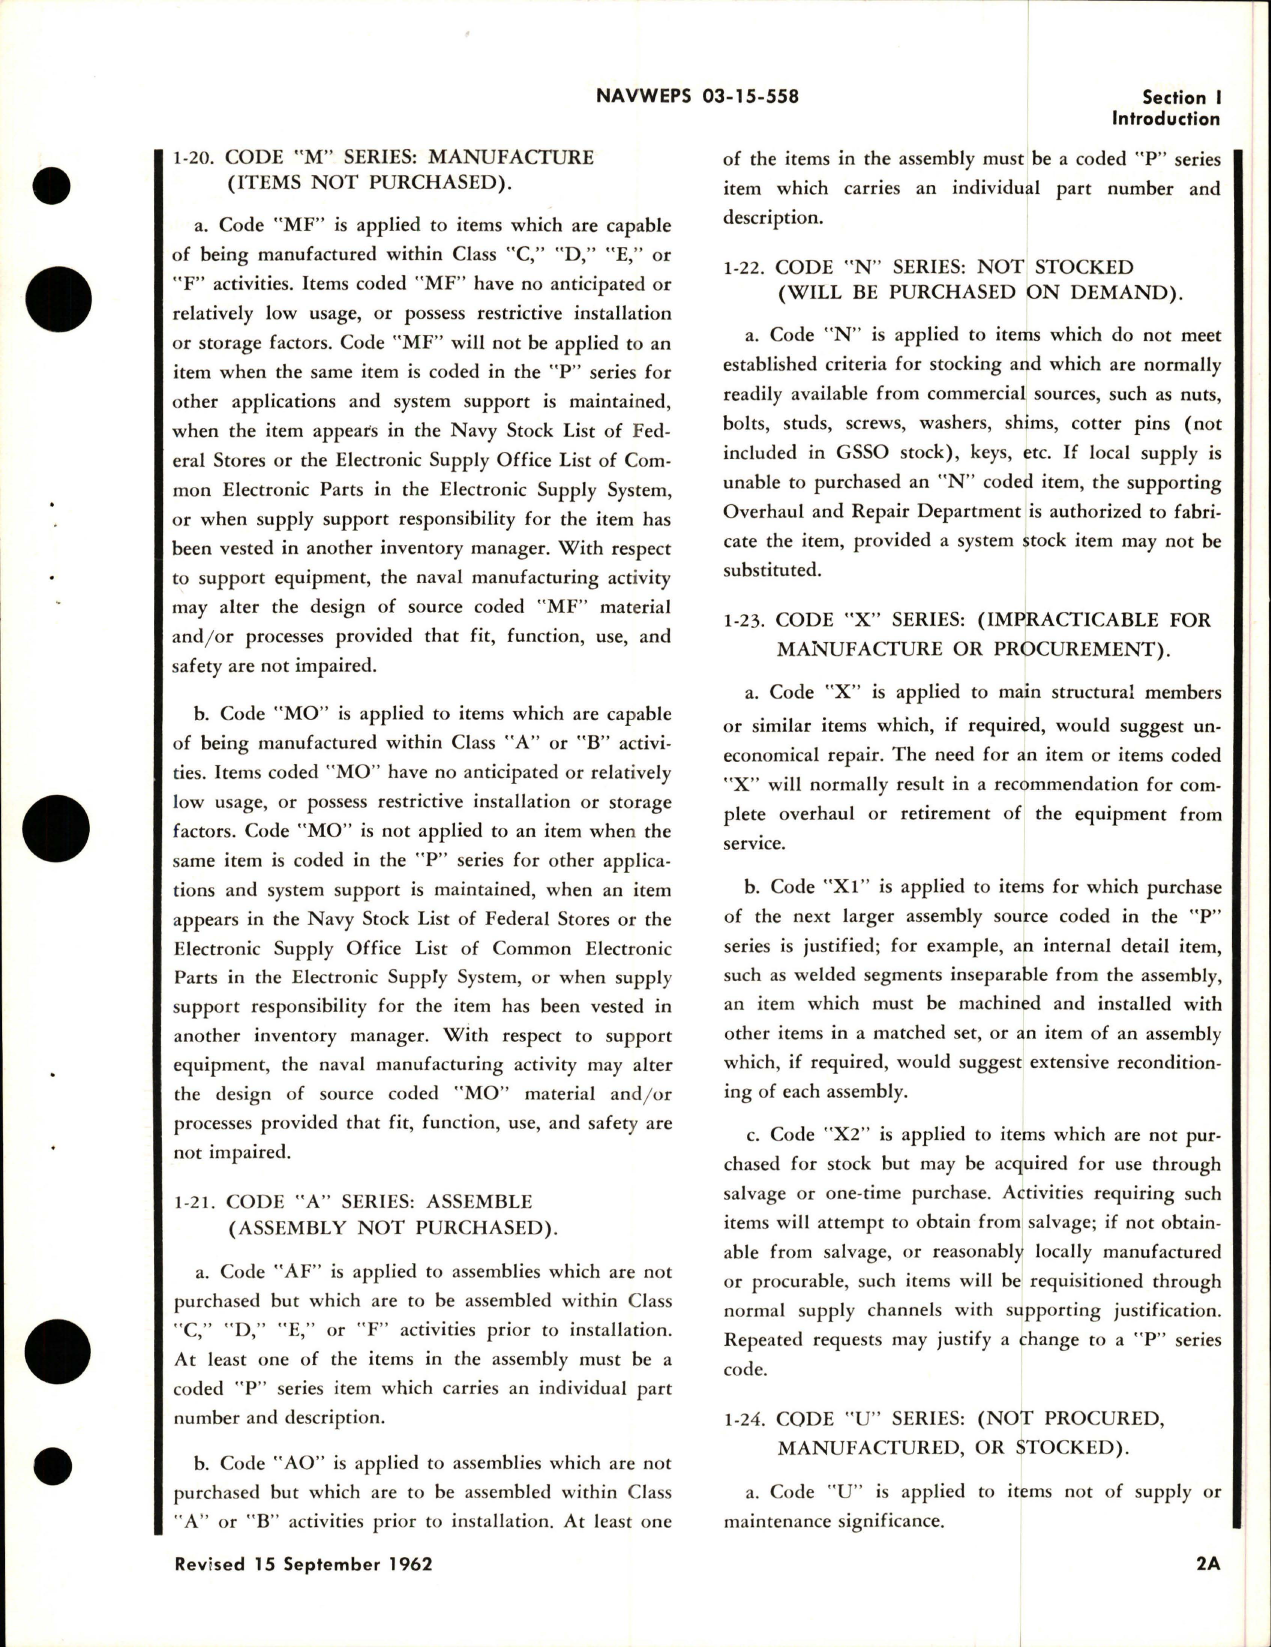 Sample page 5 from AirCorps Library document: Parts Breakdown for Oil Coolers